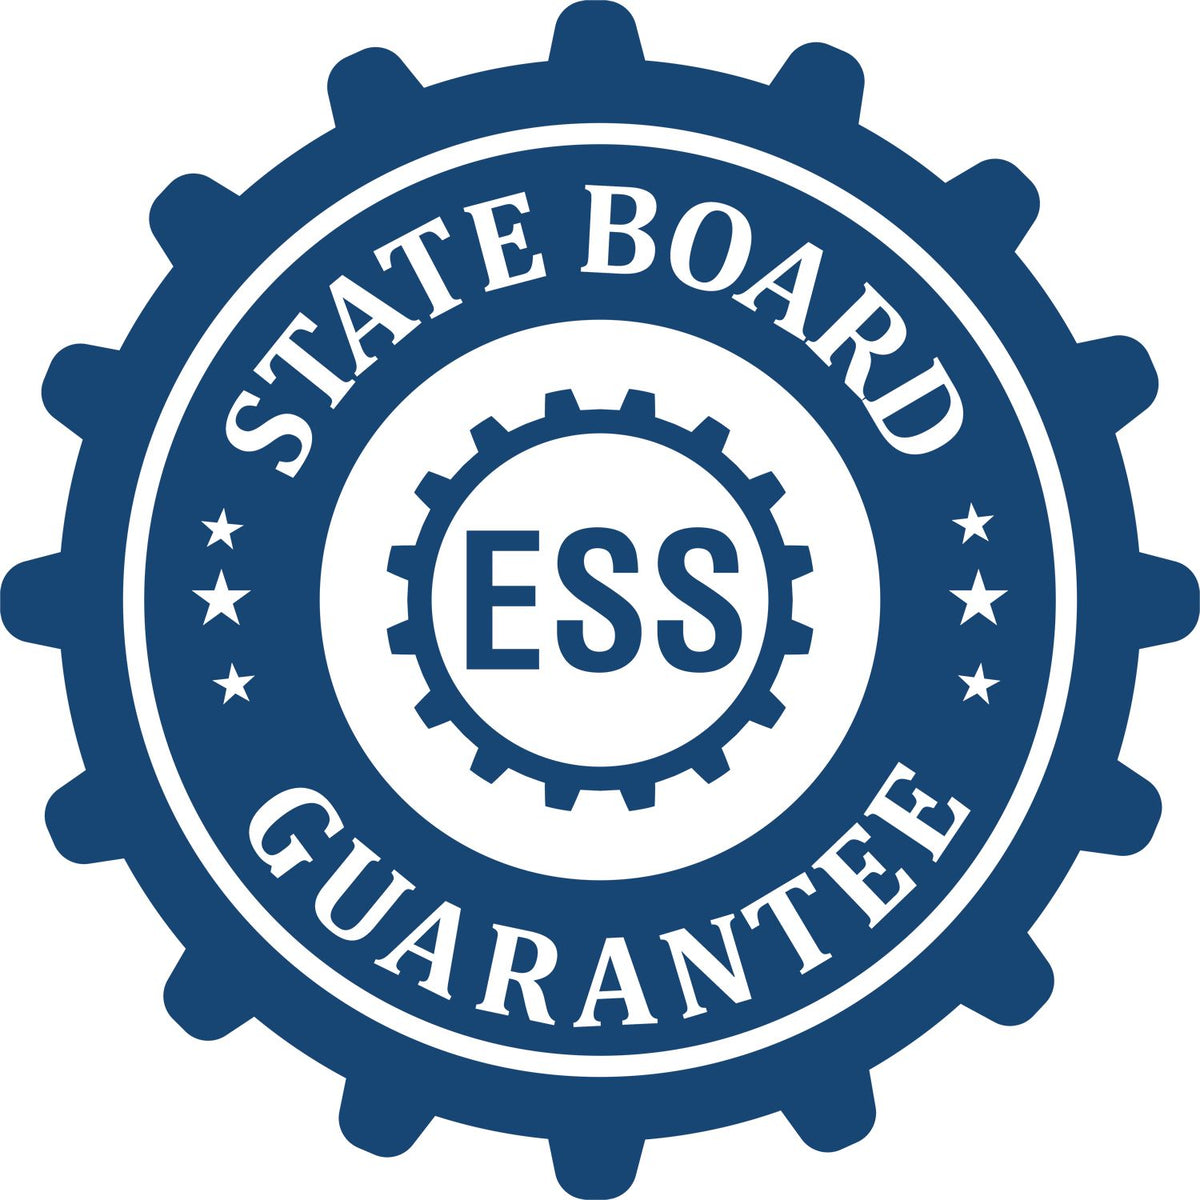 An emblem in a gear shape illustrating a state board guarantee for the Maryland Landscape Architectural Seal Stamp product.